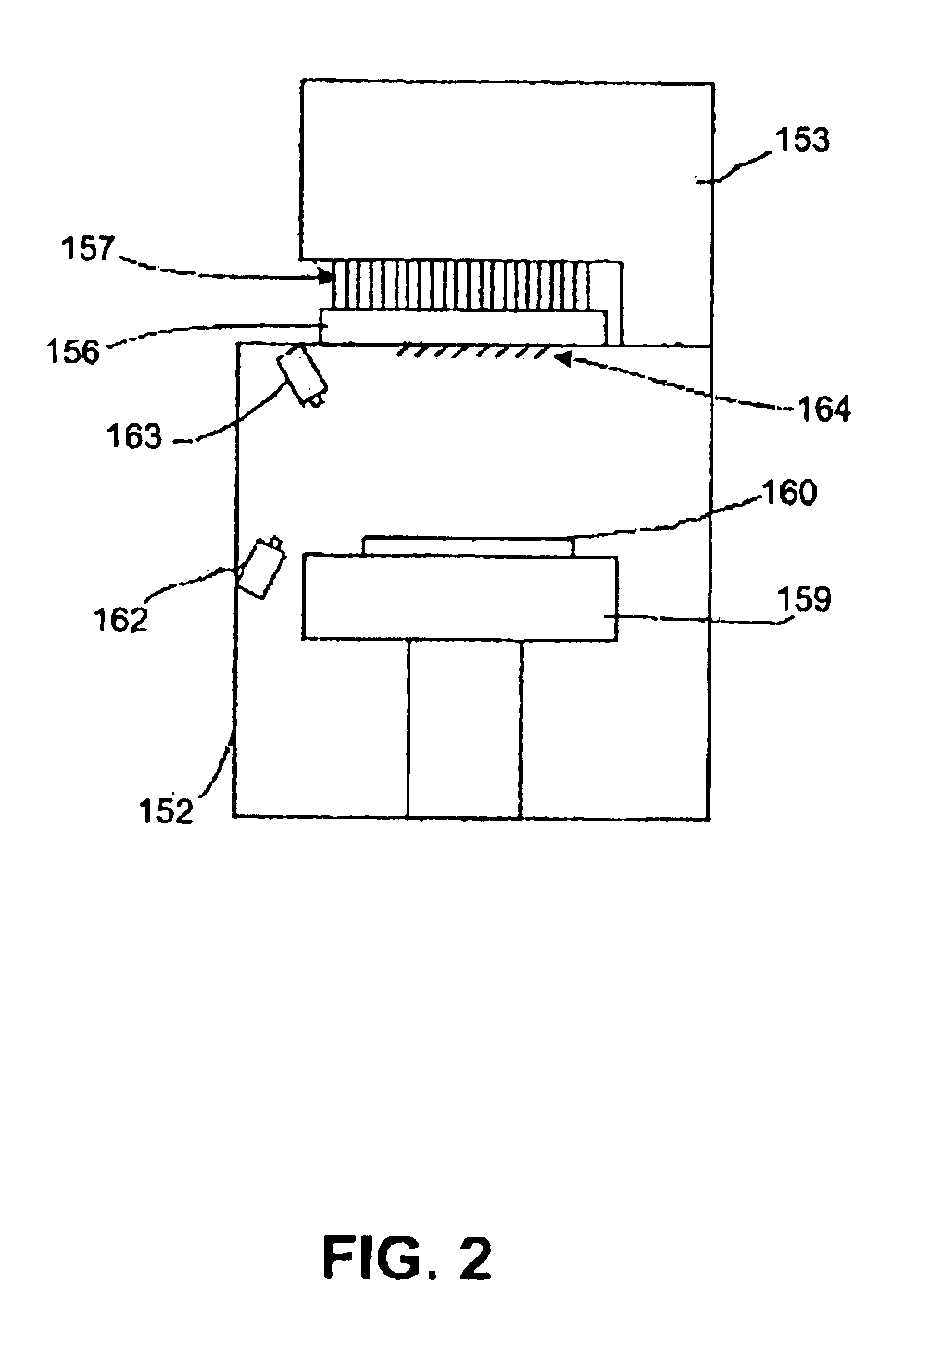 Apparatus and method for electromechanical testing and validation of probe cards